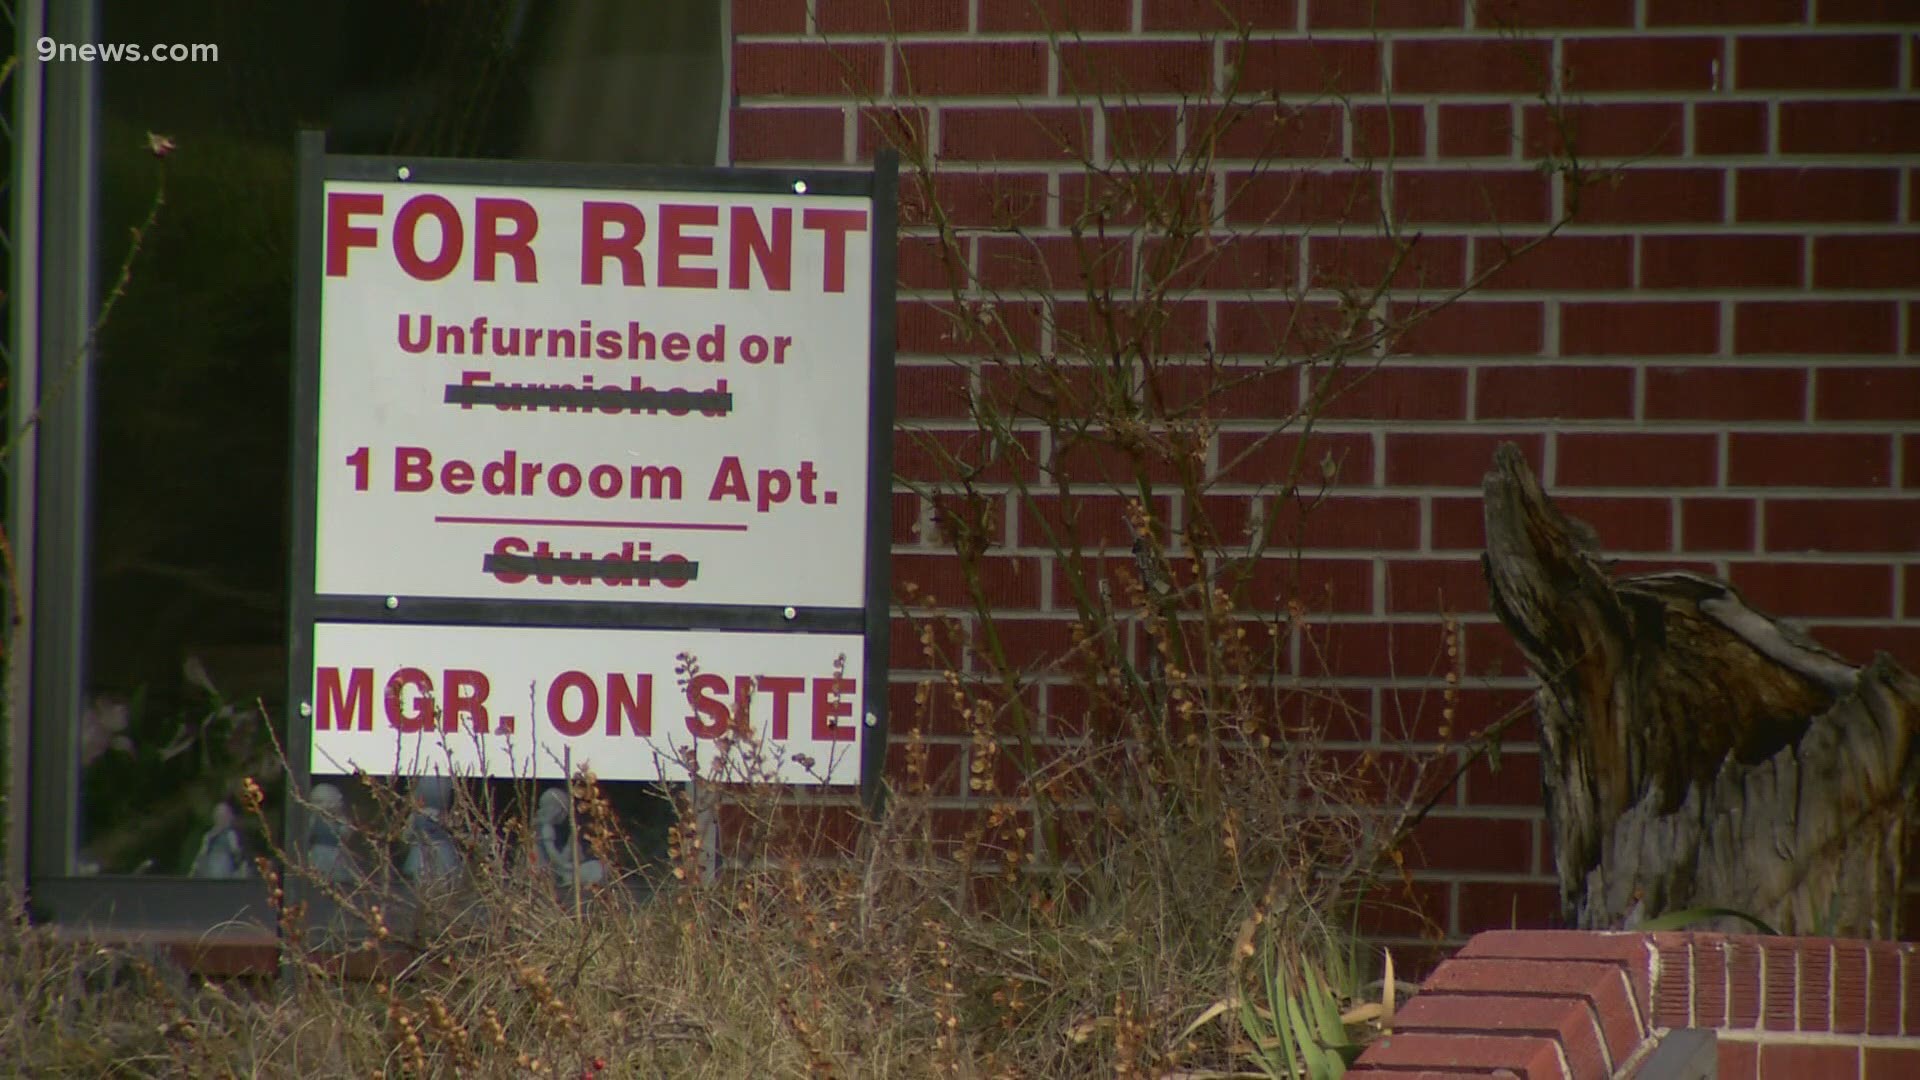 Colorado Apartment Association said when the eviction moratorium expires, it doesn't expect to see mass evictions.